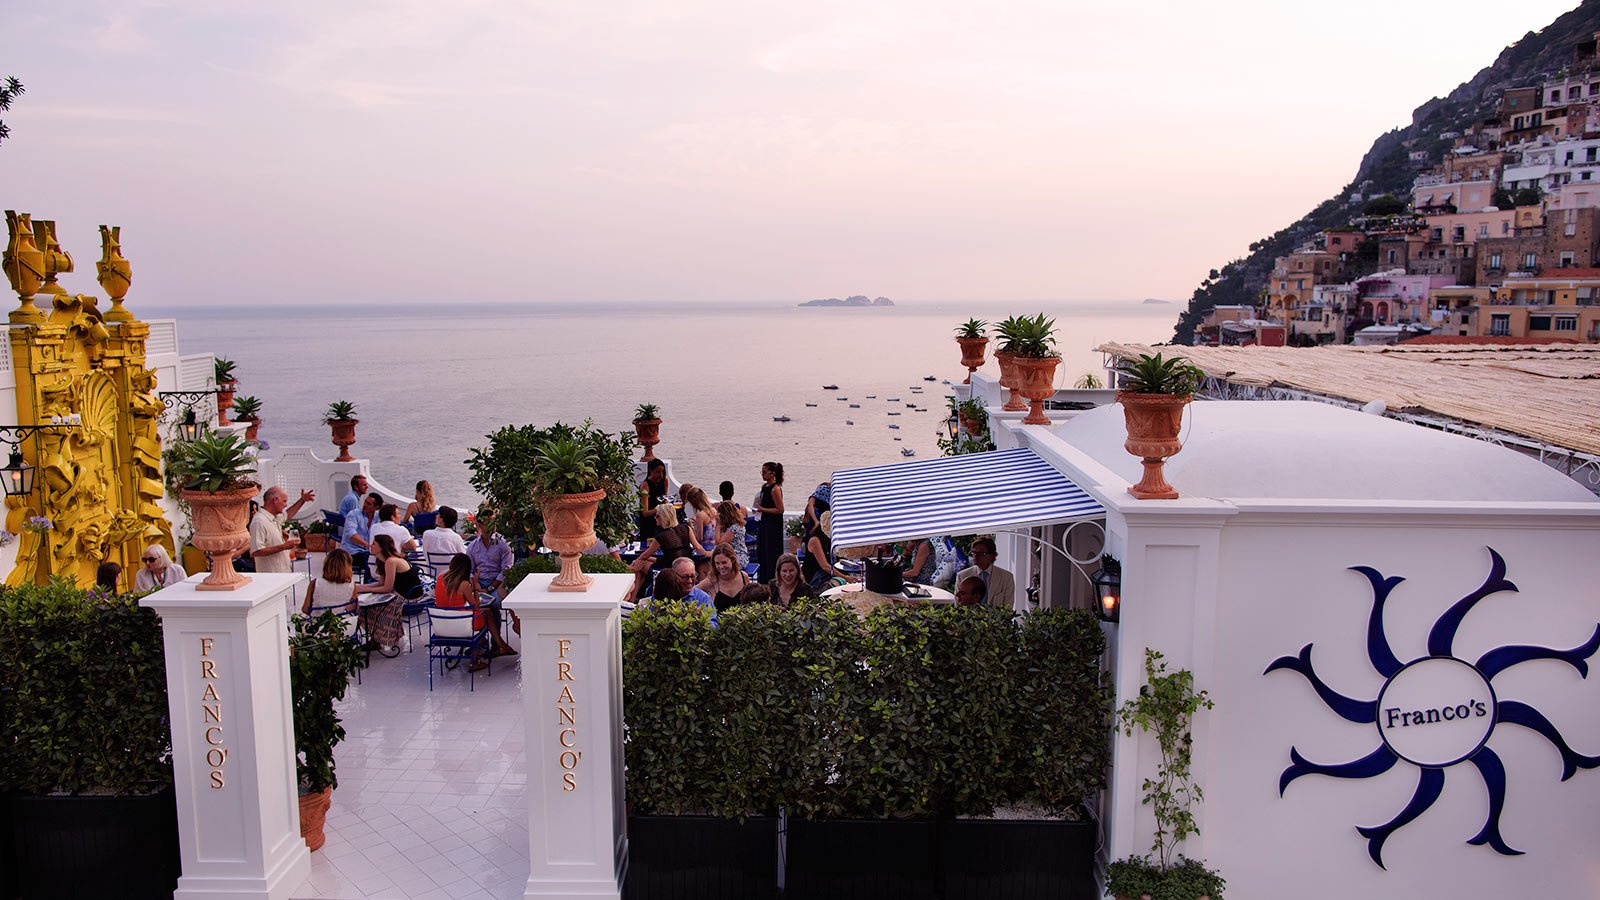 Positano things to do: a sunset aperitivo!